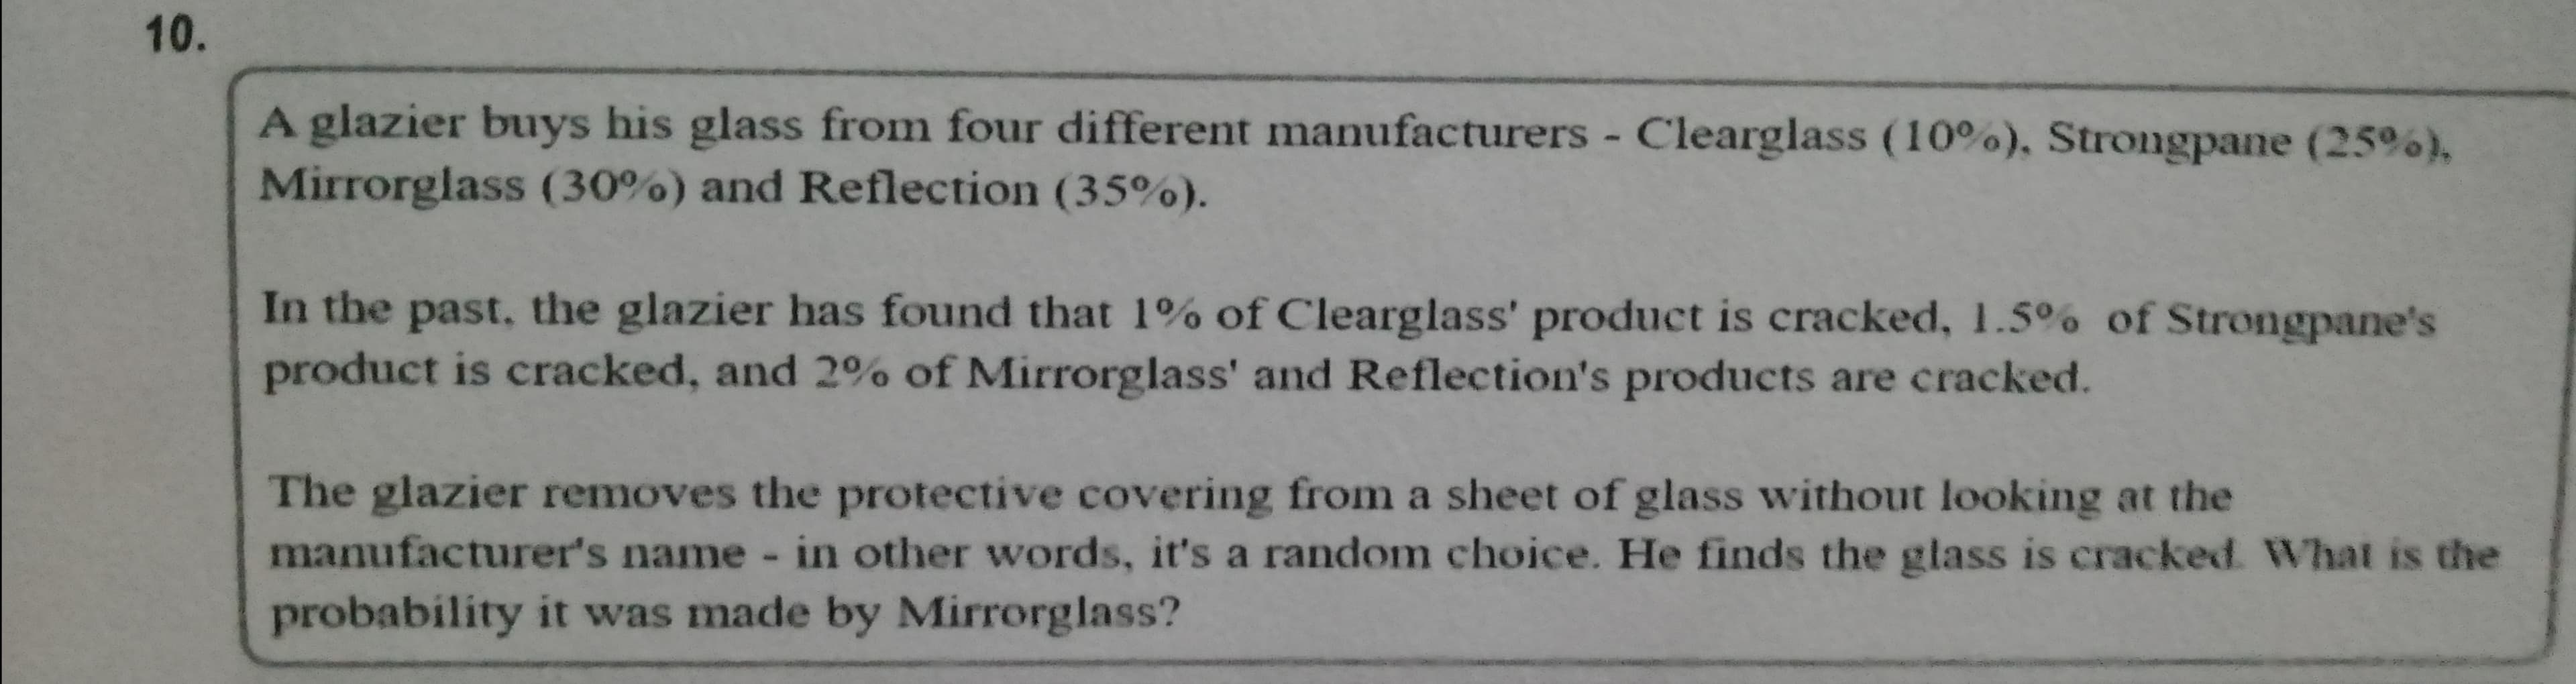 A glazier buys his glass from four different manufacturers - Clearglass (10%), Strongpane (25%),
Mirrorglass (30%) and Reflection (35%).
In the past, the glazier has found that 1% of Clearglass' product is cracked, 1.5% of Strongpane's
product is cracked, and 2% of Mirrorglass' and Reflection's products are cracked.
The glazier removes the protective covering from a sheet of glass without looking at the
manufacturer's name - in other words, it's a random choice. He finds the glass is cracked. What is the
probability it was made by Mirrorglass?
